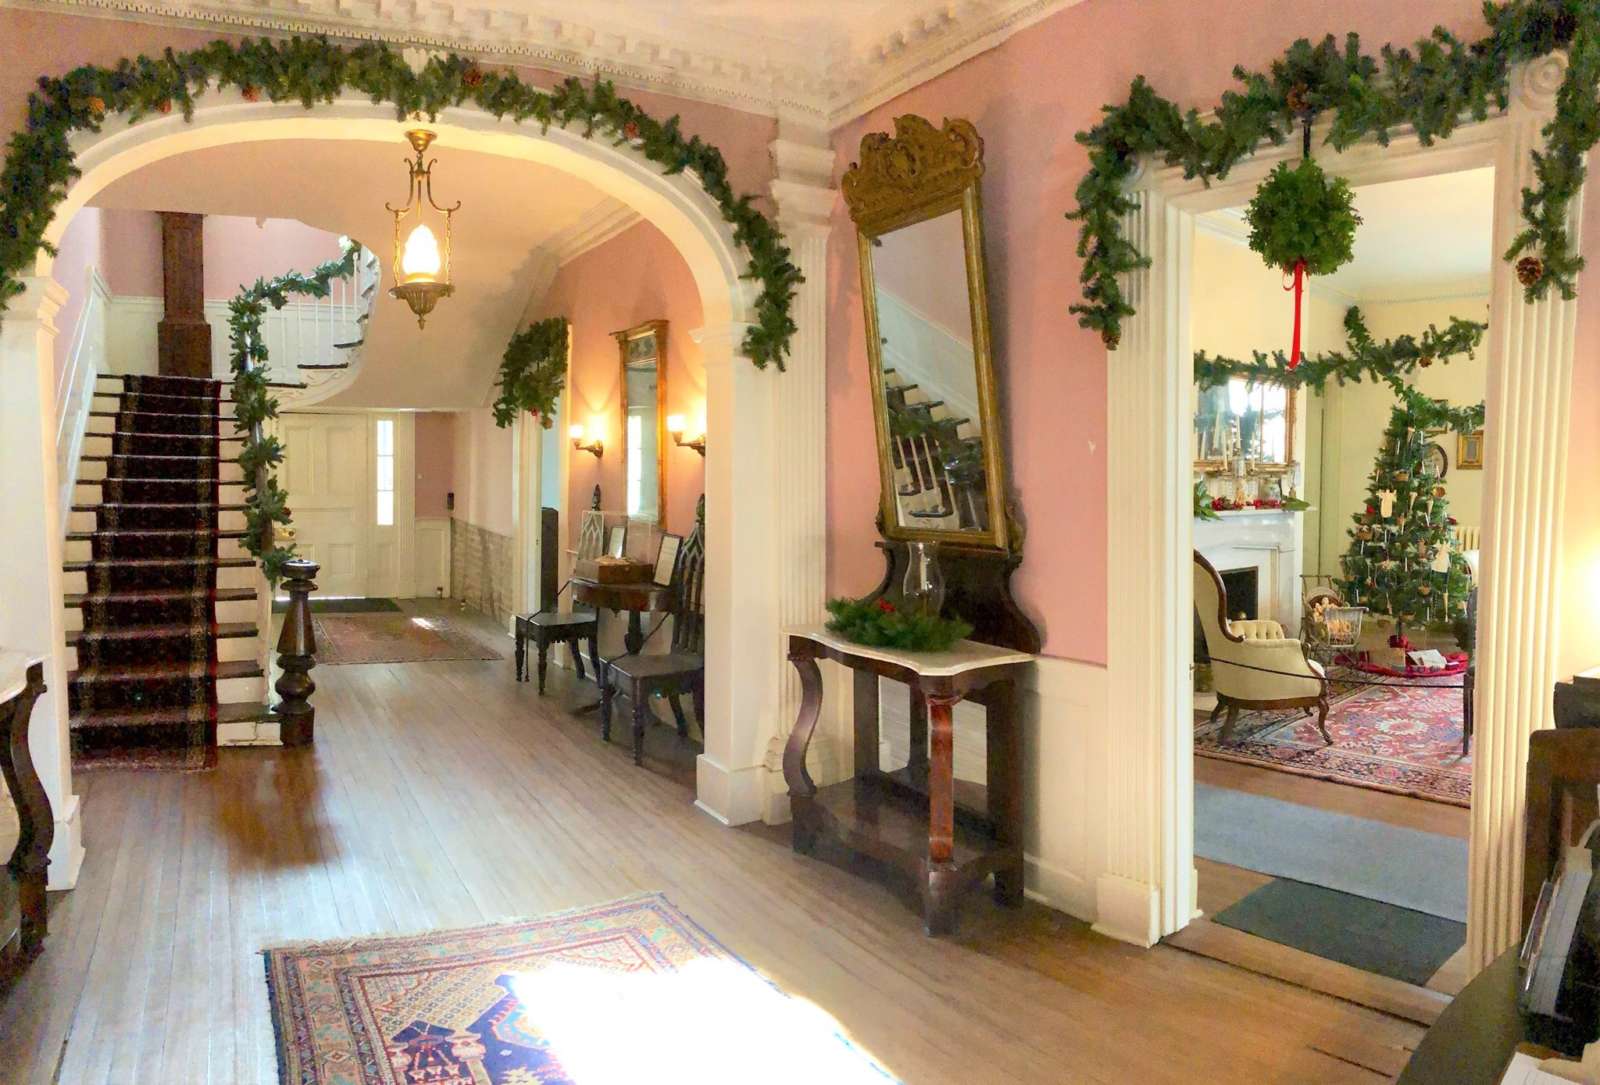 Lee-Fendall House Opens Winter Victorian Tours | ALXnow